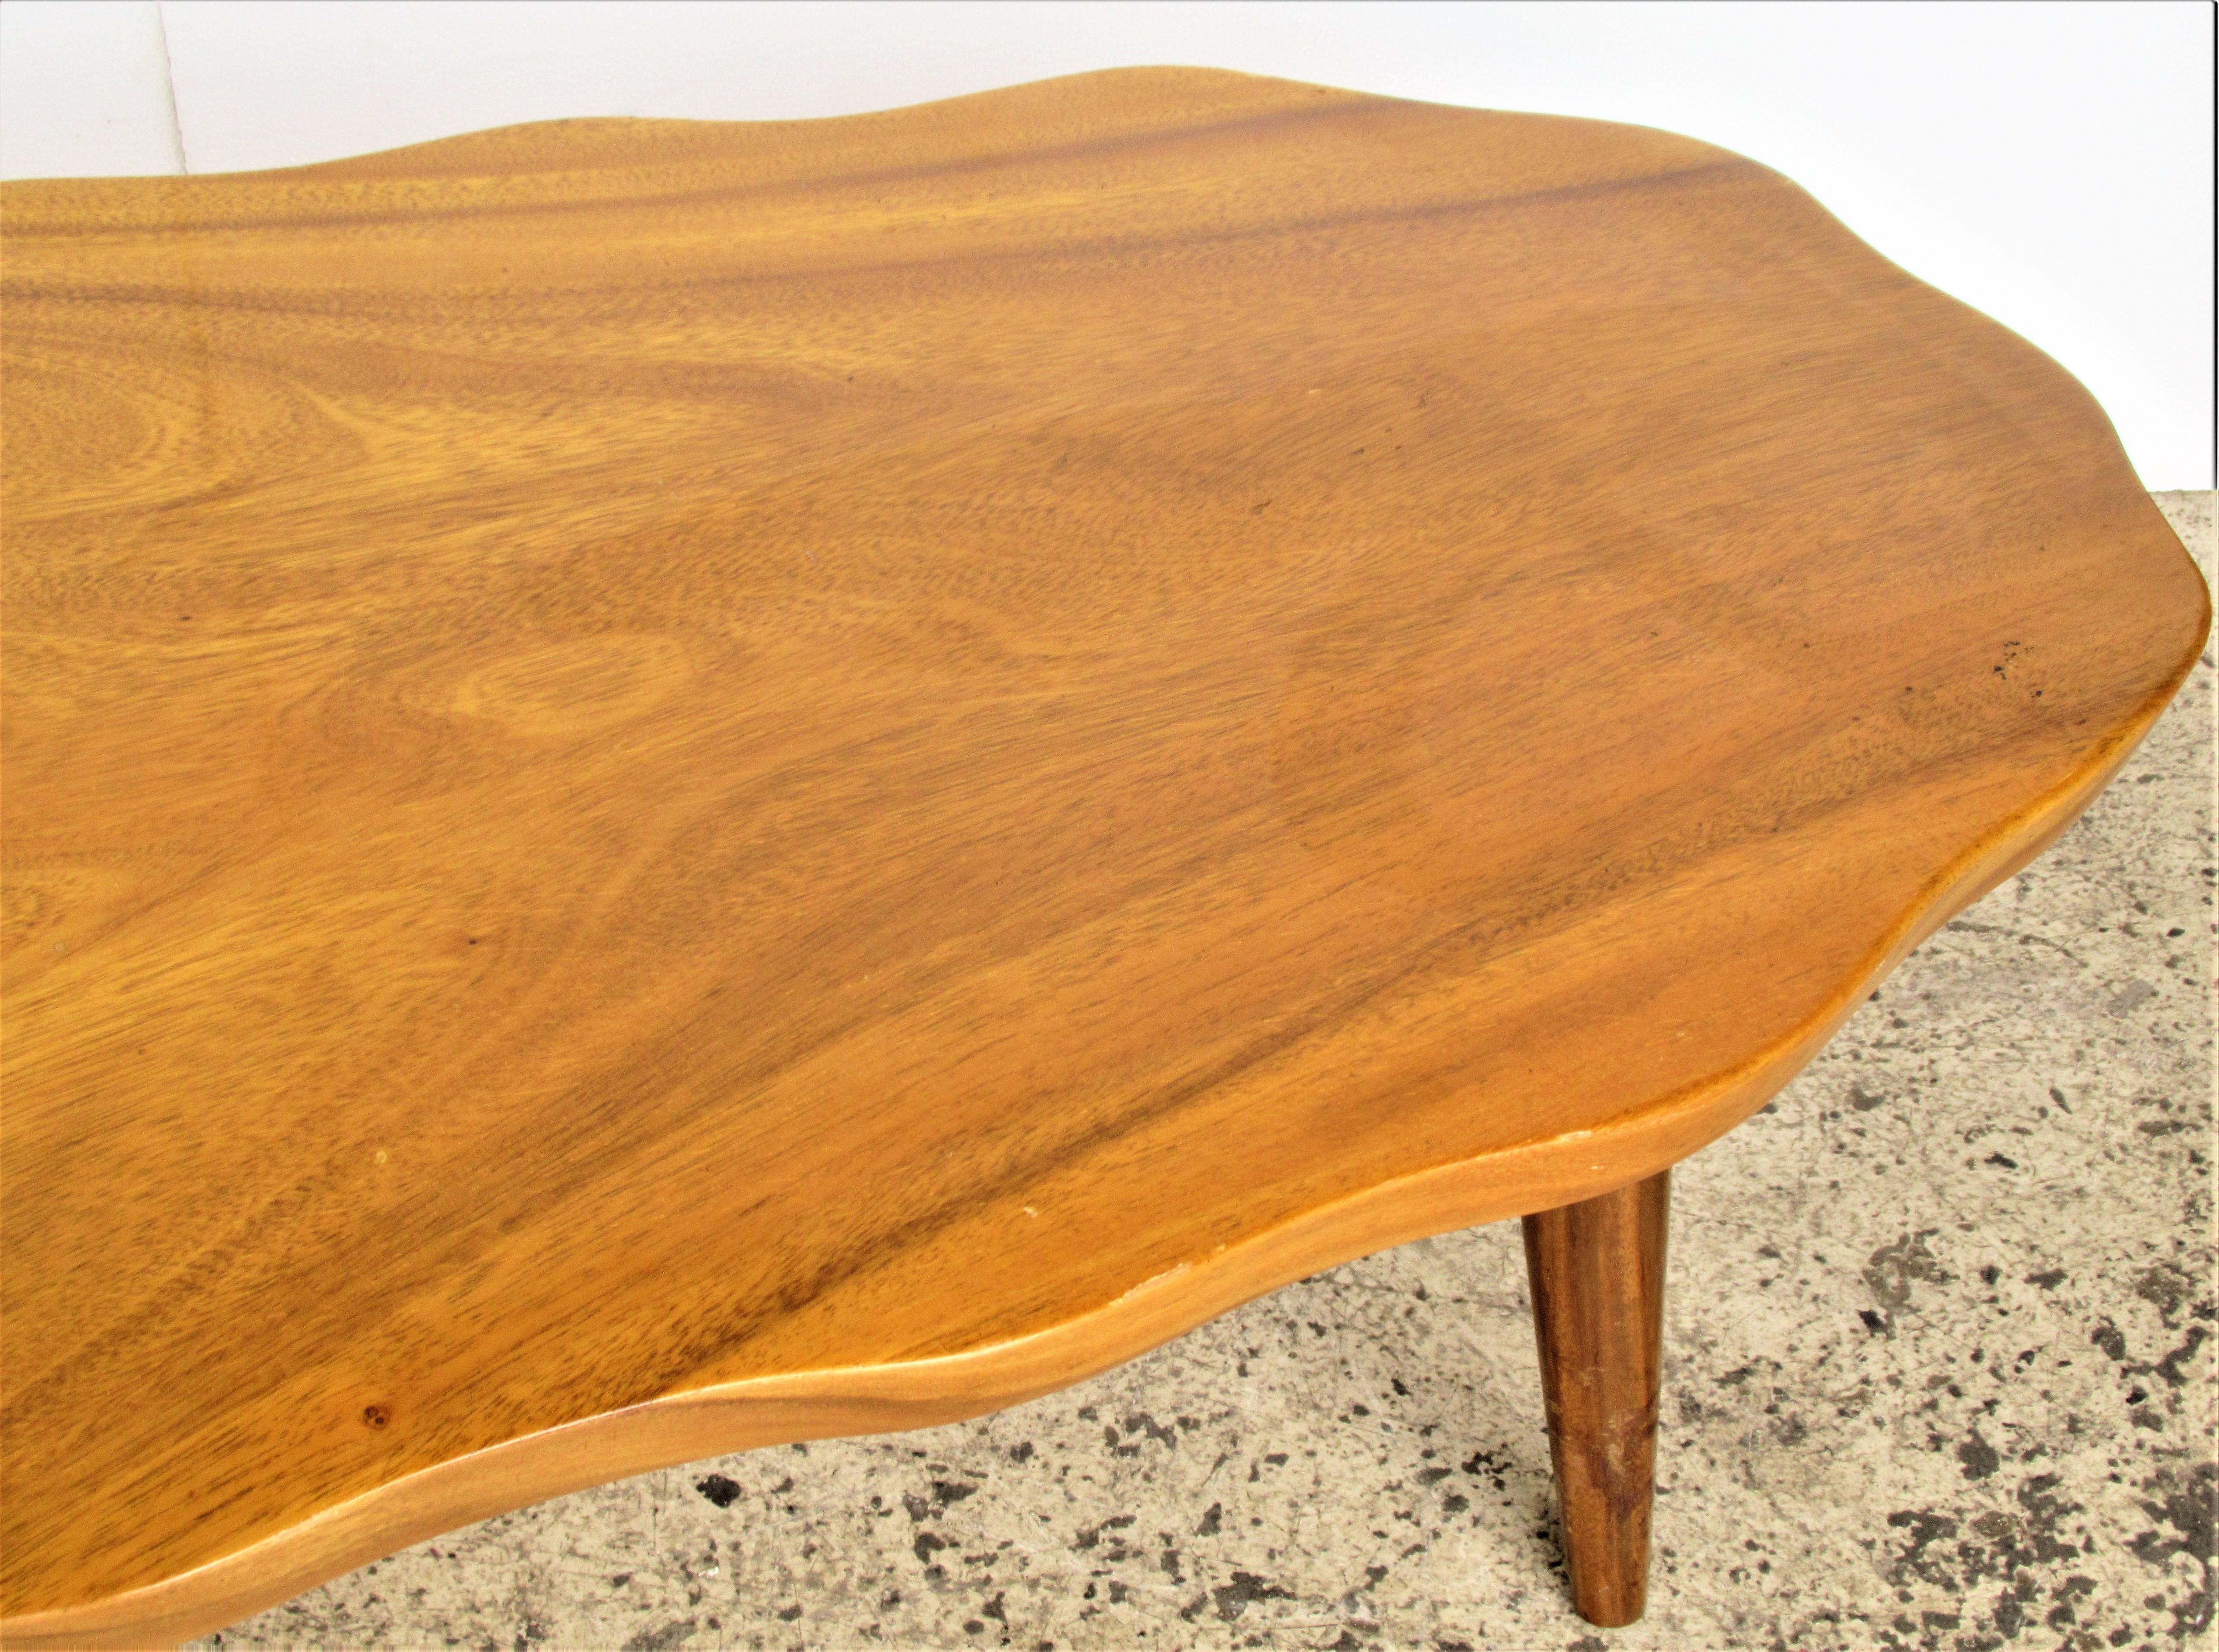 1960's organic modern monkey pod wood coffee table with biomorphic form and original glowing surface to the beautifully grained wood. Stamped on underside - made in Honolulu, Hawaii by Harry's Cabinet & Curio Shop.